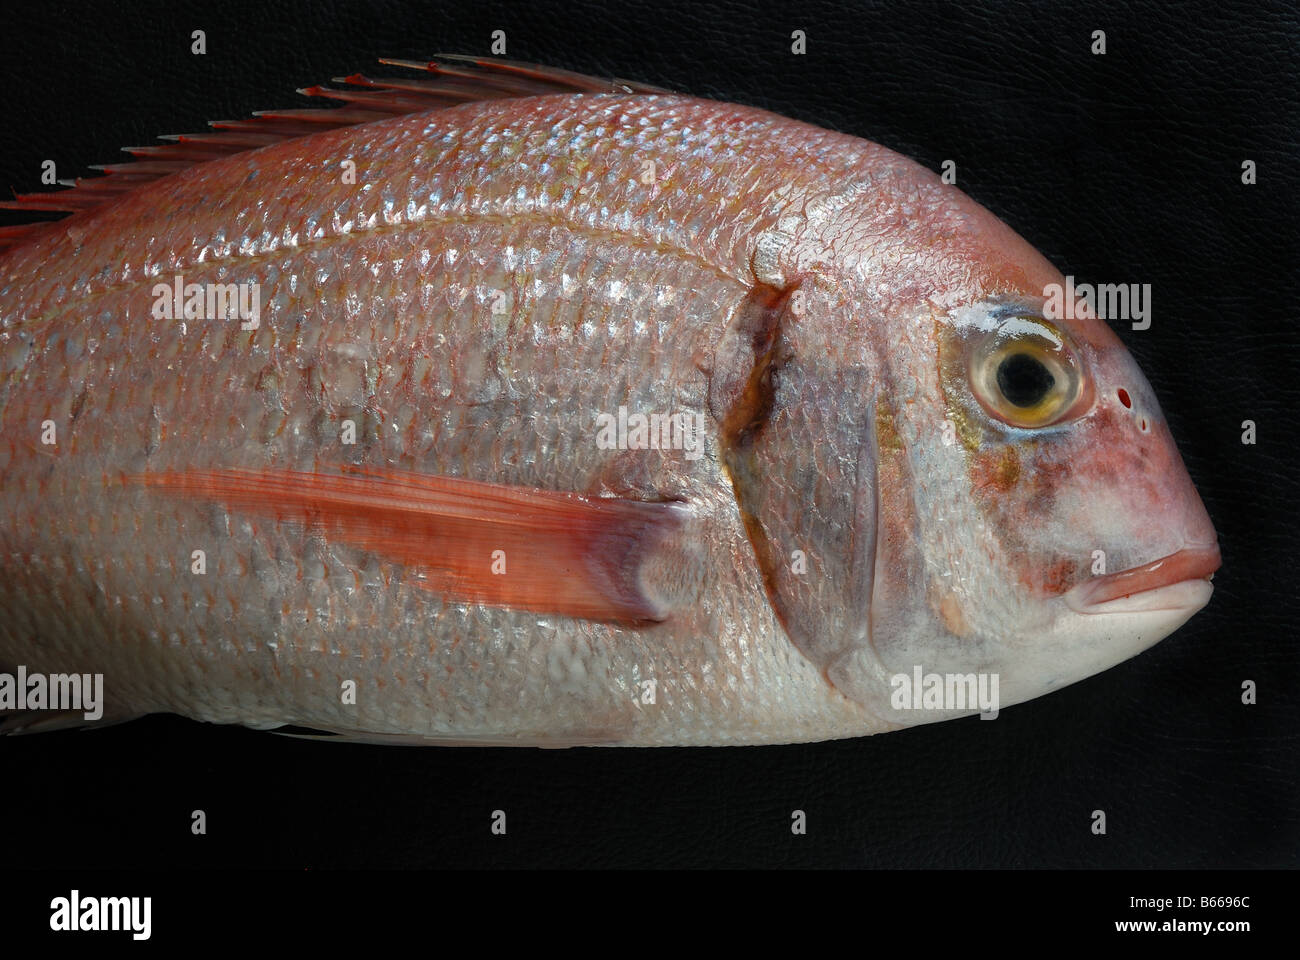 A red porgy (Pagrus pagrus) also known as red or common seabream, a species of fish in the Sparidae family. Stock Photo